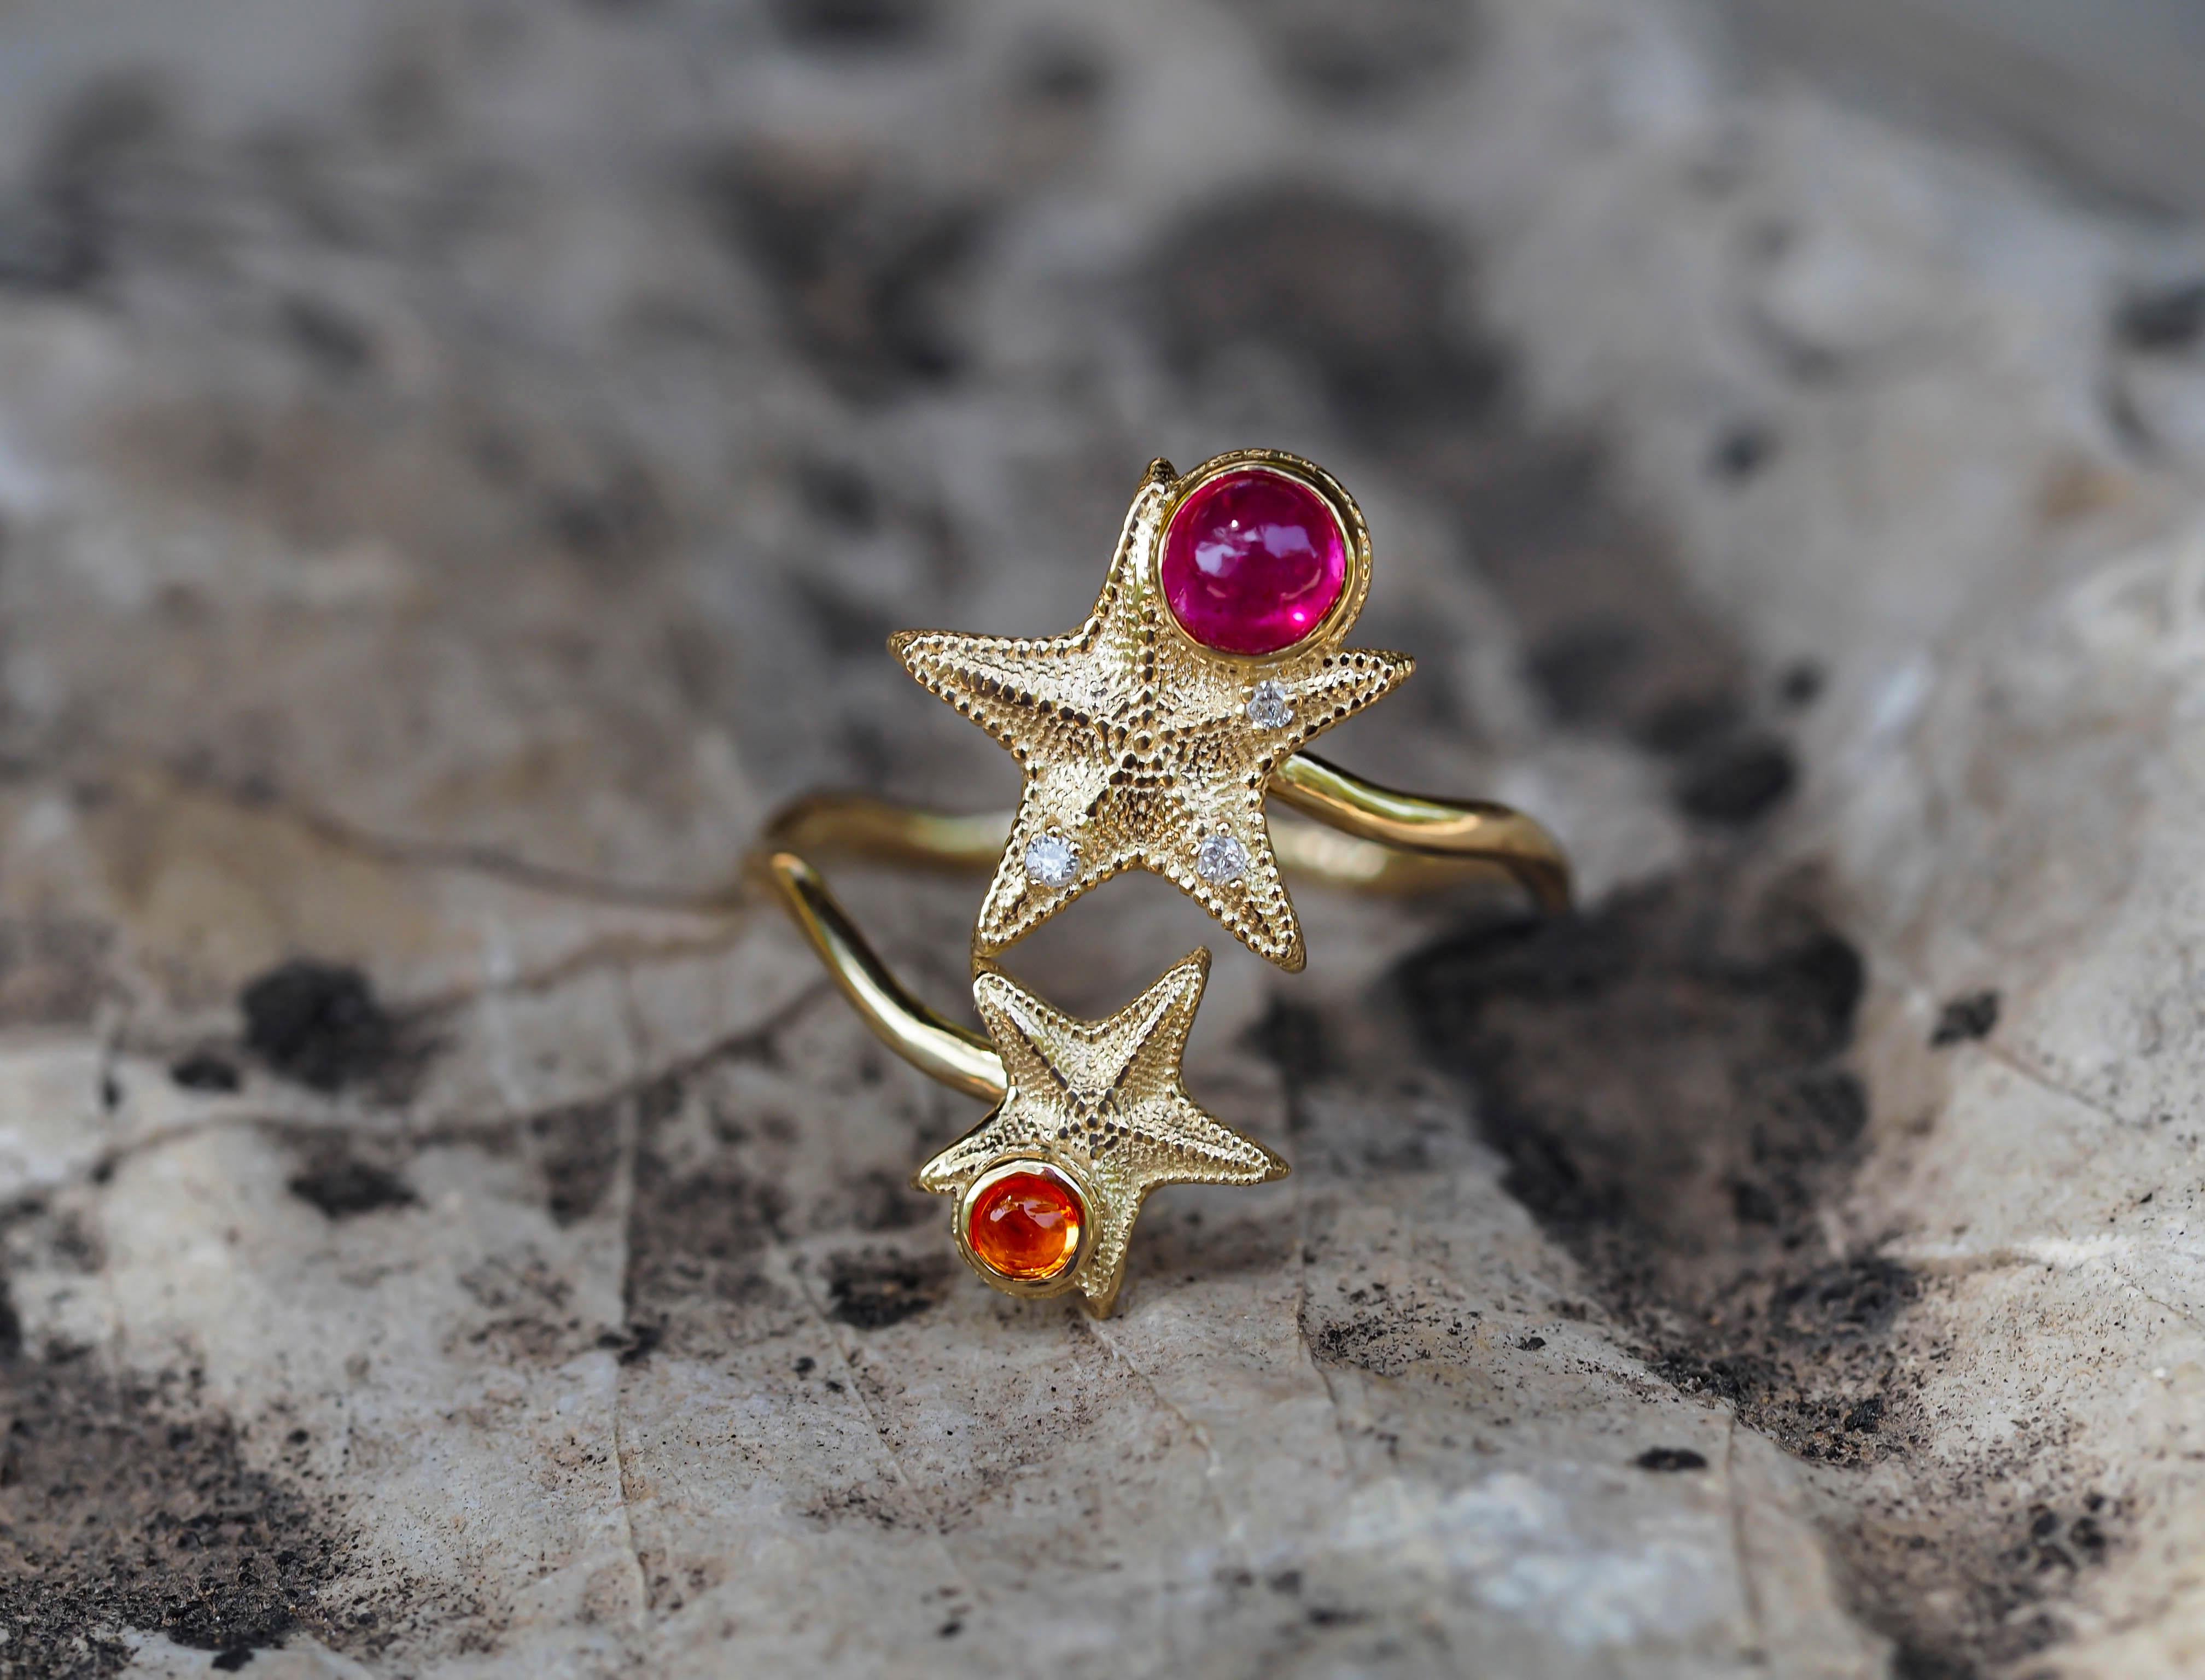 For Sale:   Ruby and Sapphire cabochon ring in 14 karat gold.  Star Fish Ring! 8